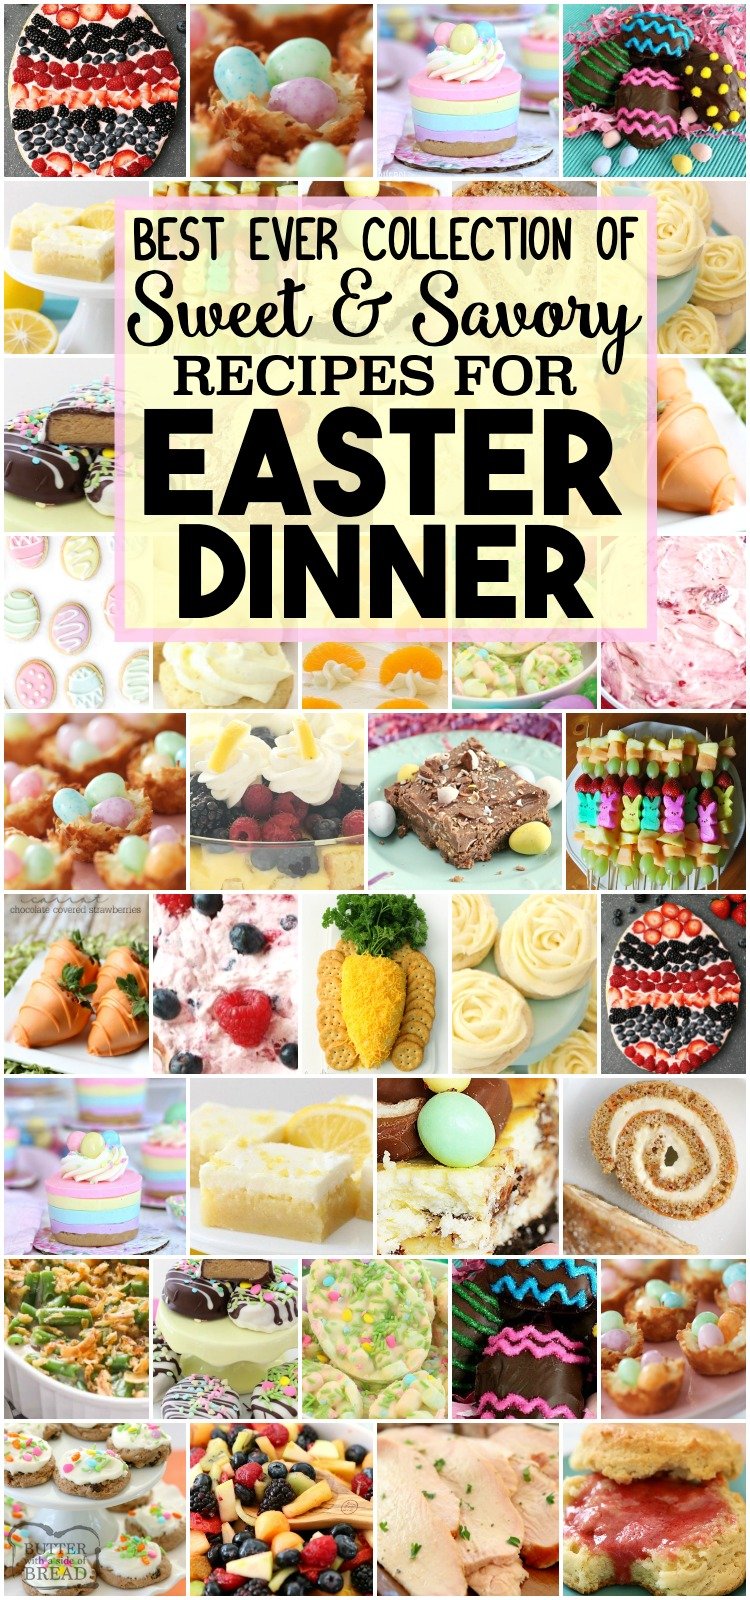 Best Easter Dinner Recipes: tried and true easy Easter Dinner Recipes with everything from slow cooker ham to Orange Cream Fruit Salad, Banana Cream Pie Cookies, Pecan Grape Salad and more. All the Easter dinner recipes you need for a delicious, festive holiday are here. #Easter #dinner #recipes #Spring #ham #fruitsalad #recipes from BUTTER WITH A SIDE OF BREAD